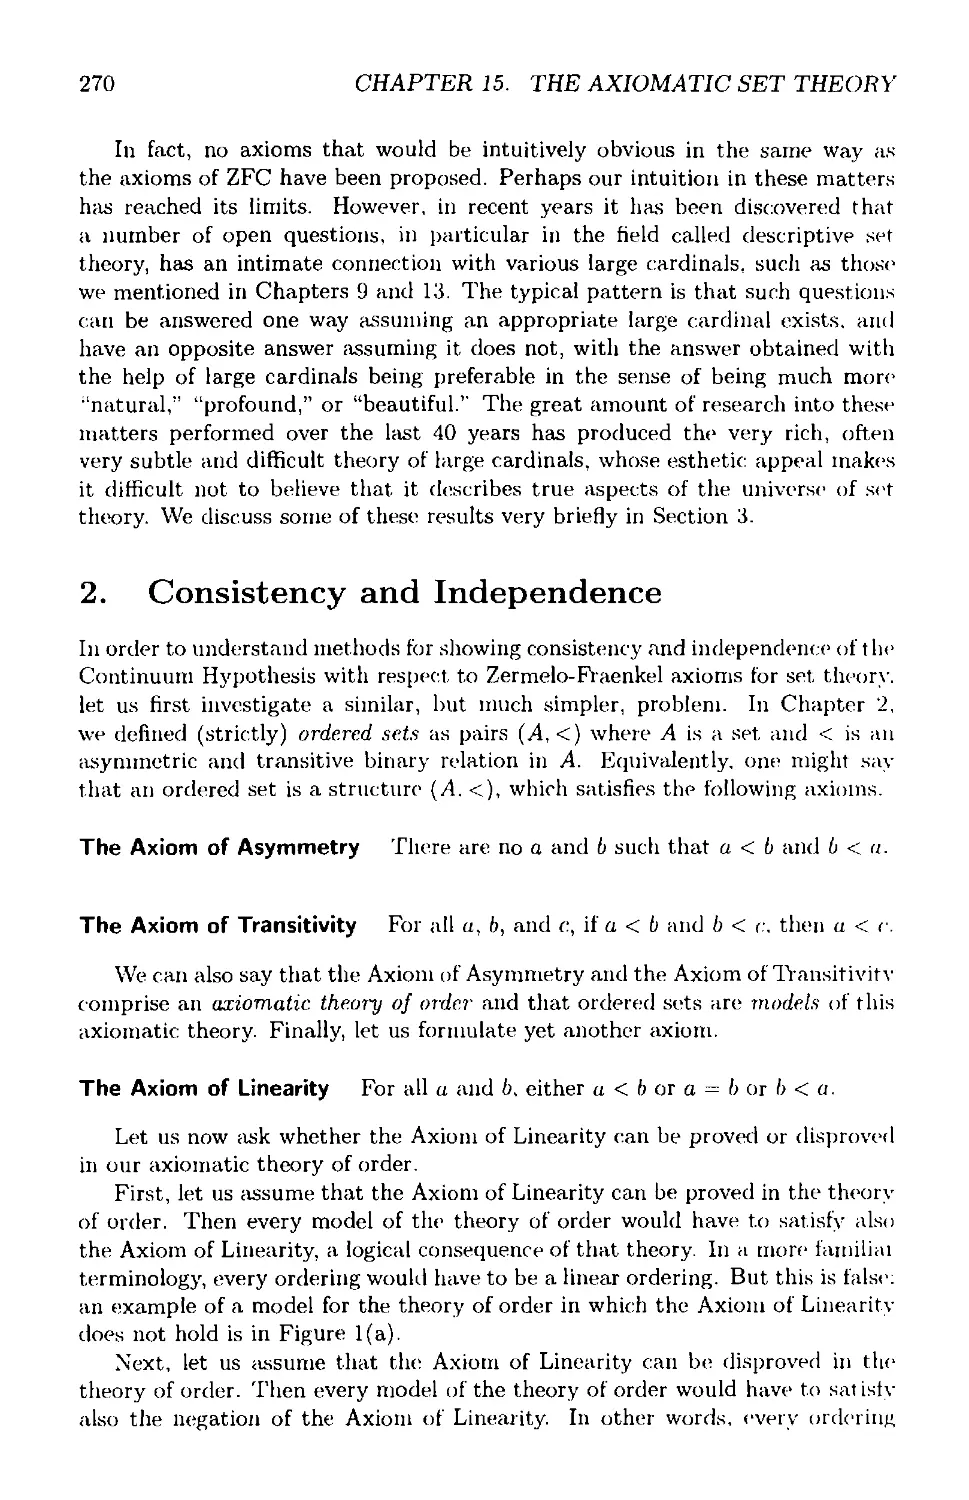 2 Consistency and Independence